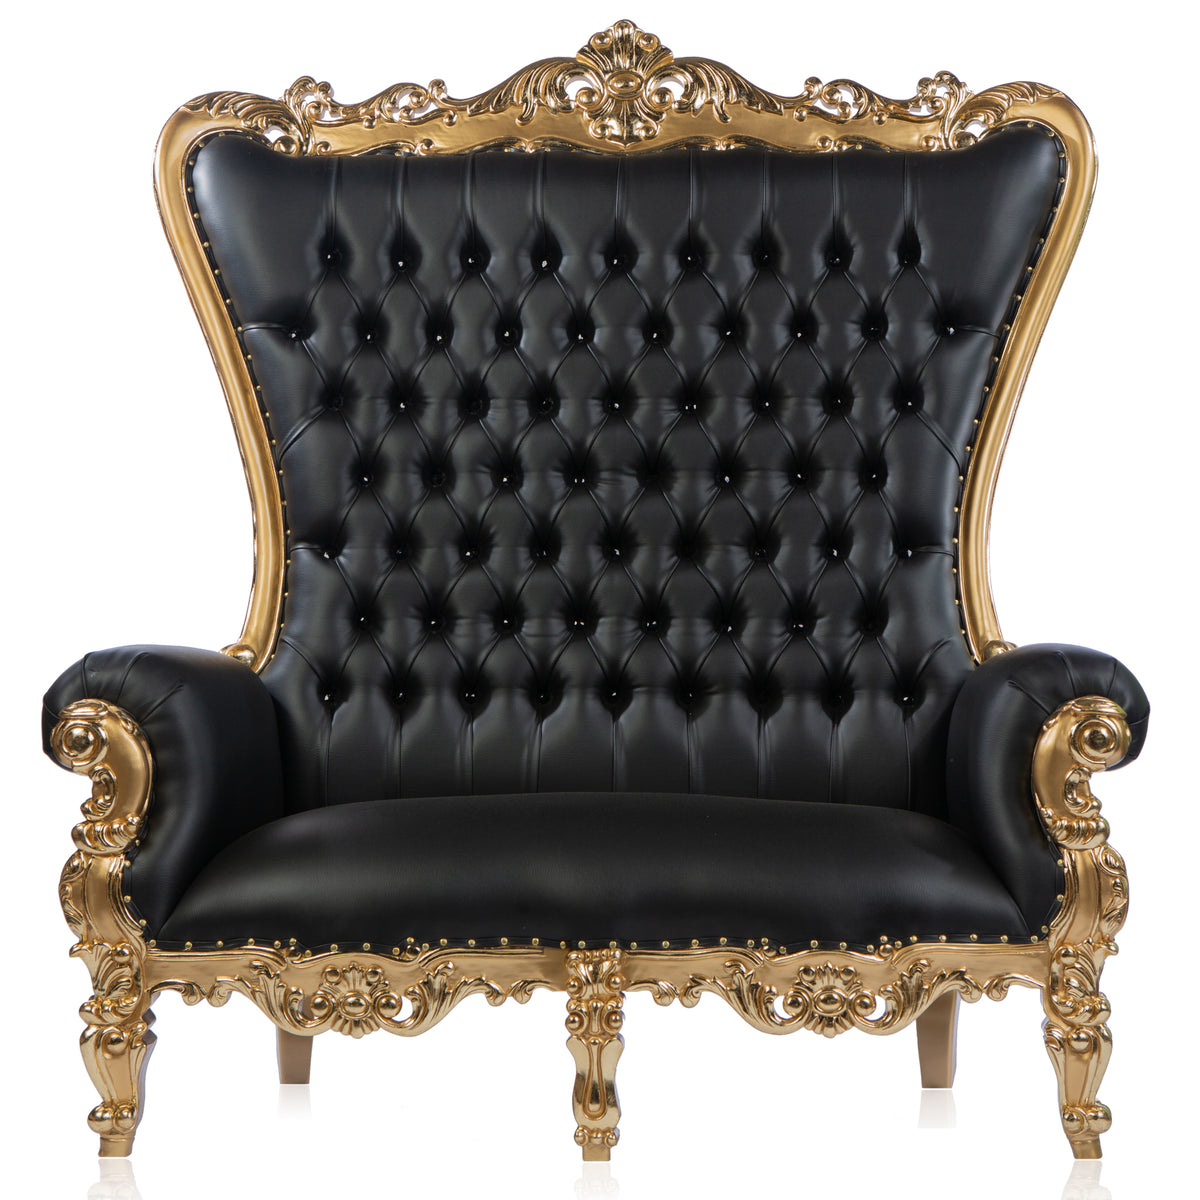 Versace Double Throne (Black/Gold)